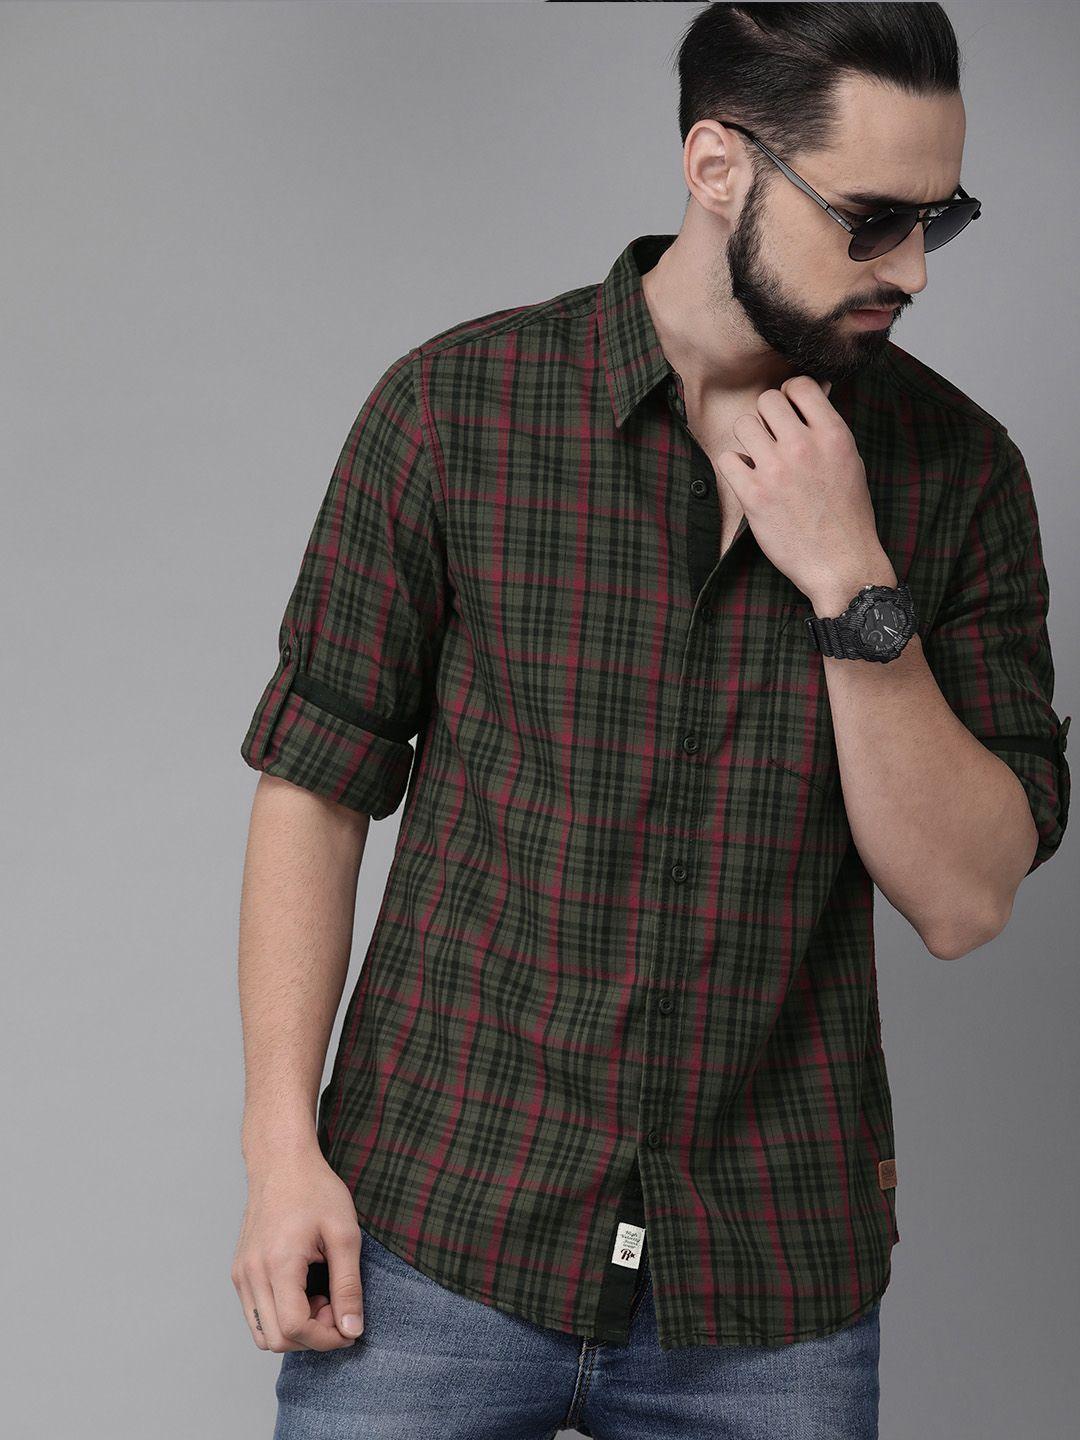 the roadster lifestyle co men olive green & black regular fit checked sustainable casual shirt